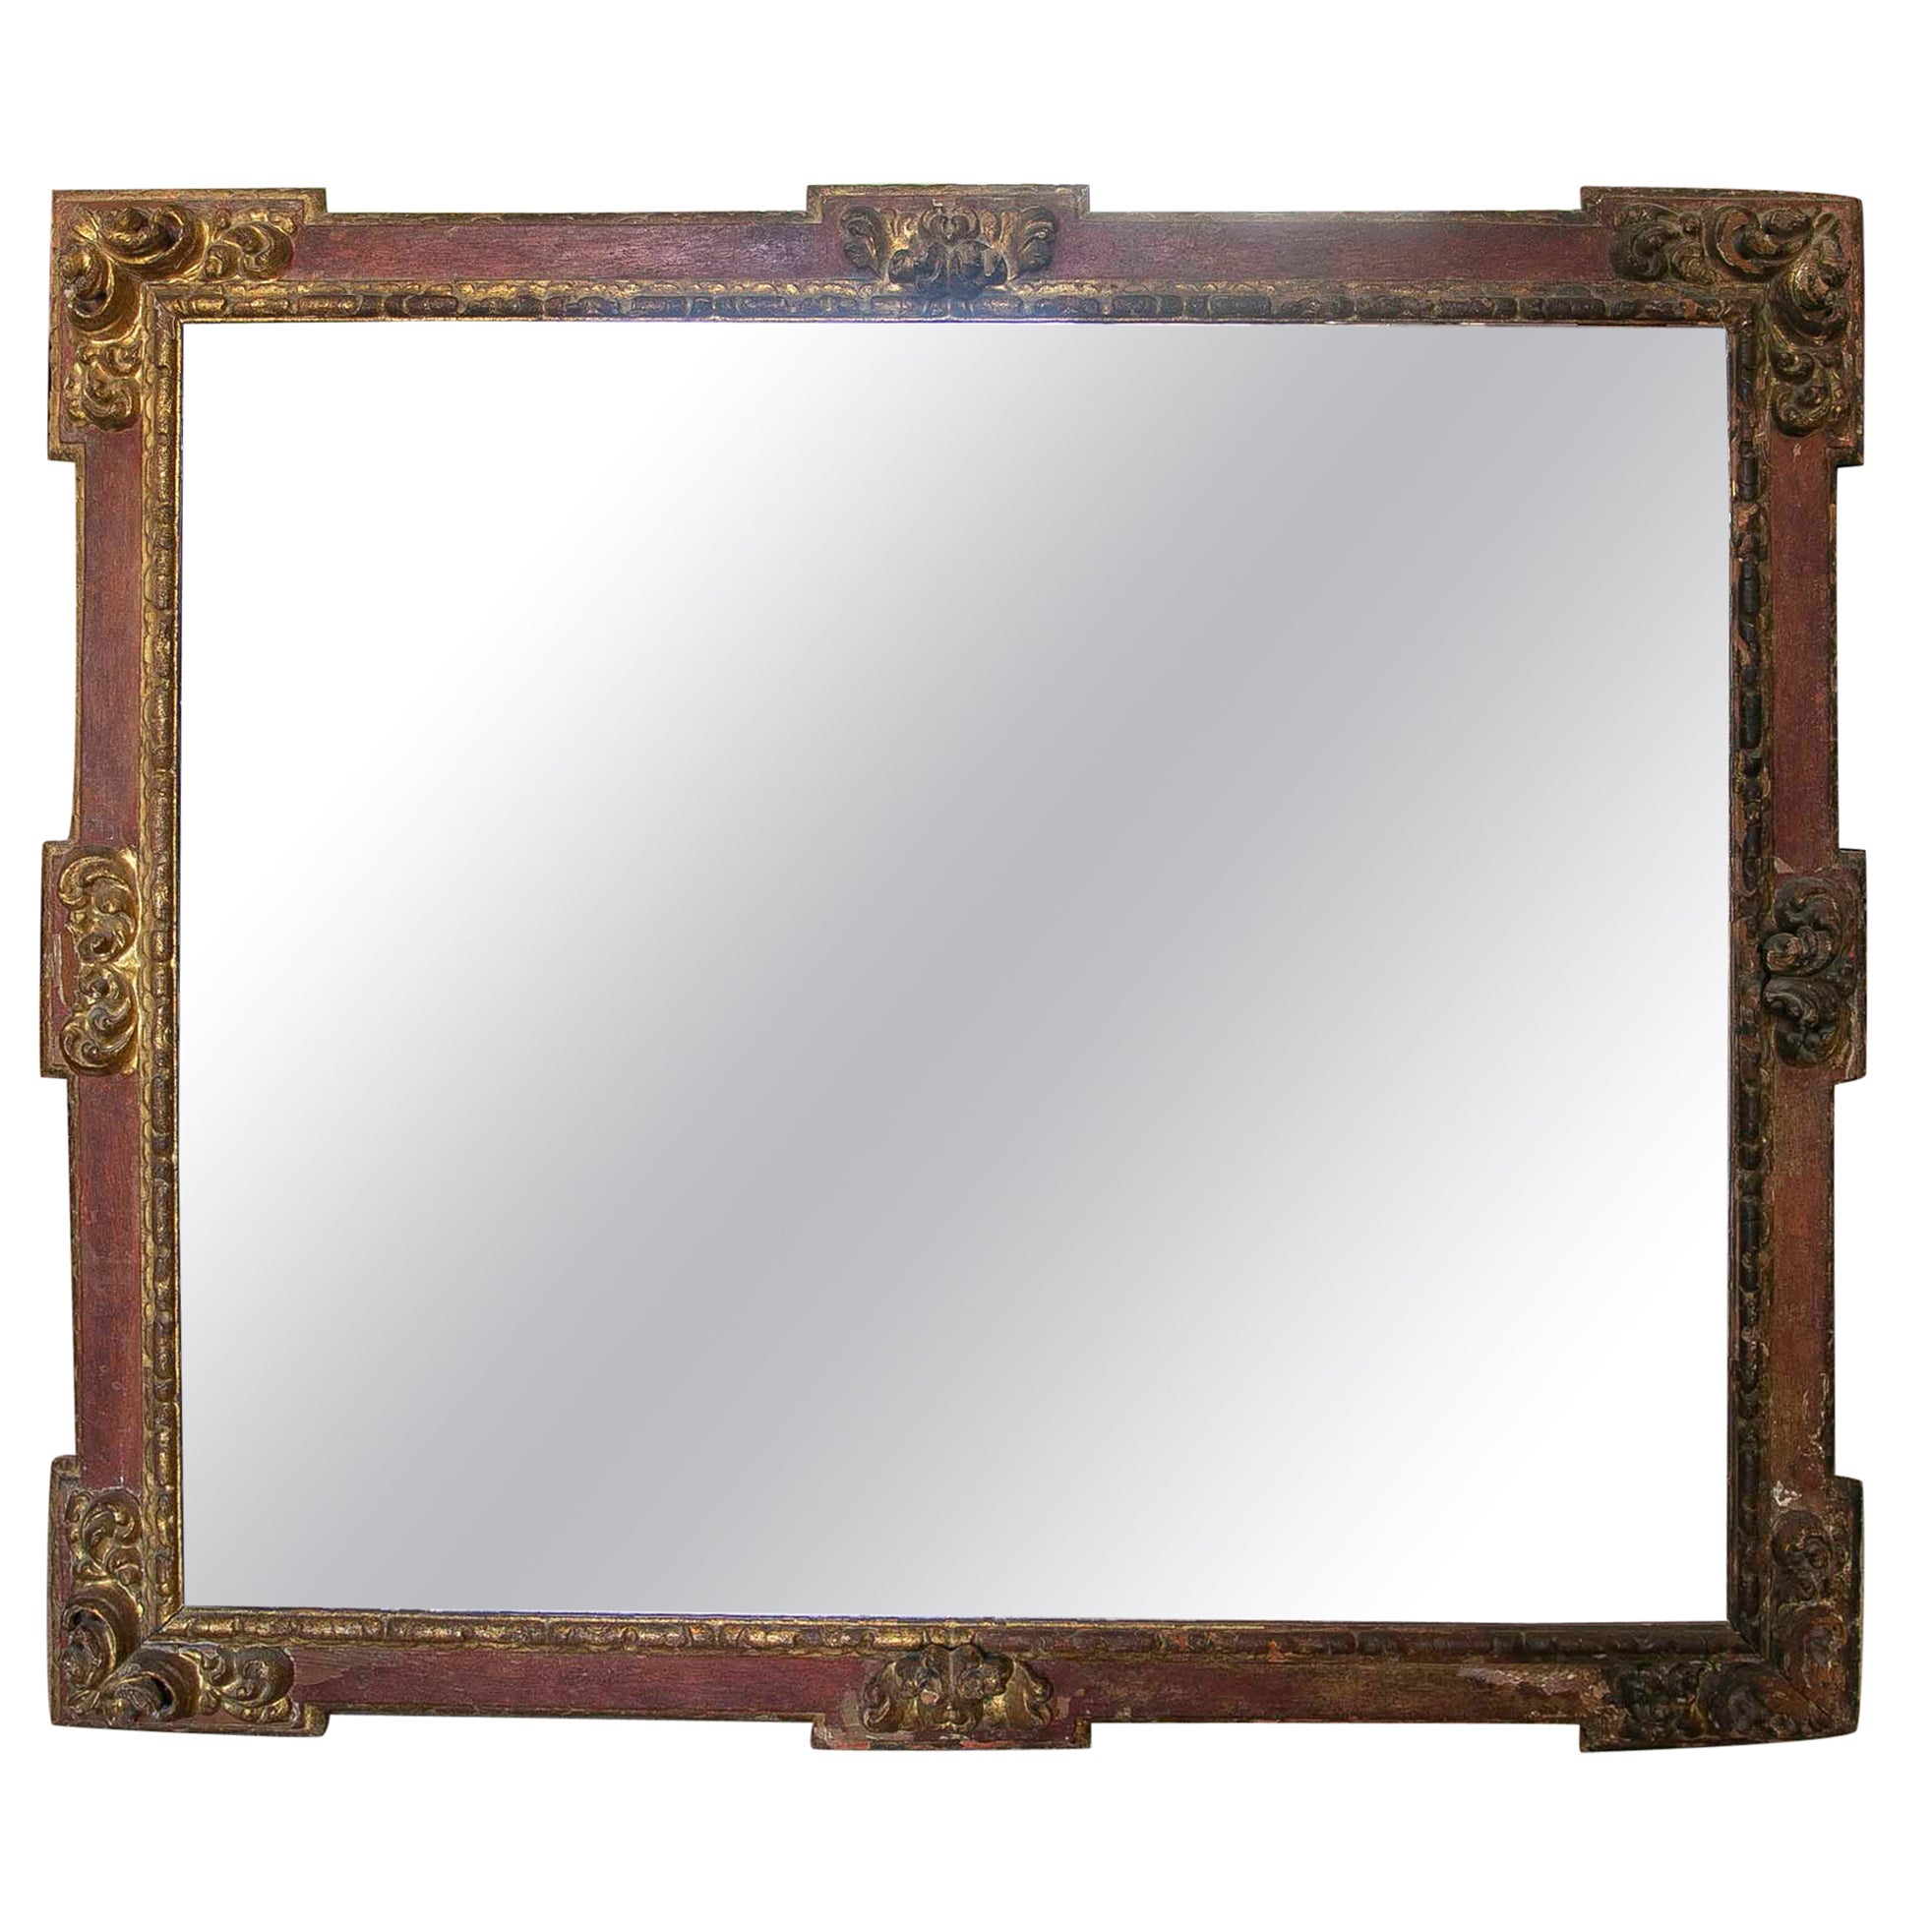 18th Century Spanish Polychrome Wooden Mirror Decorated with  Gold Rocailles For Sale